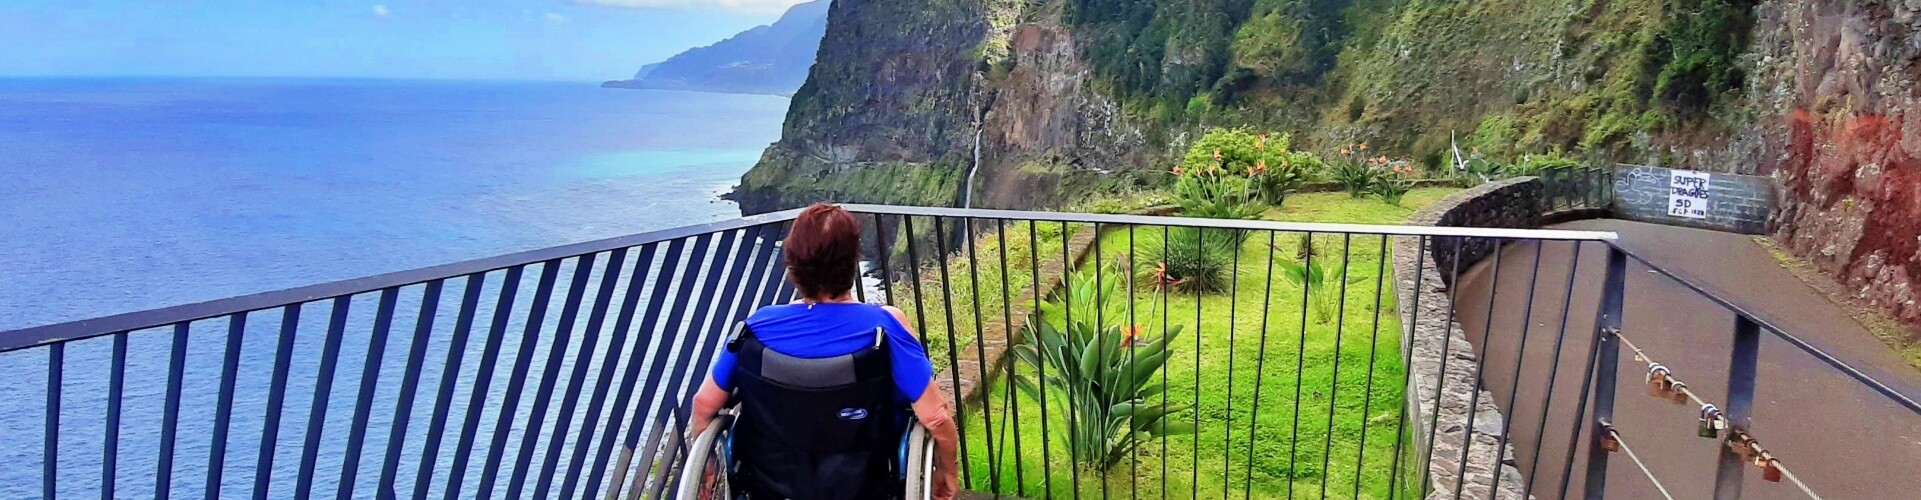 Visit São Vicente by Wheelchair Accessible Tour in Madeira